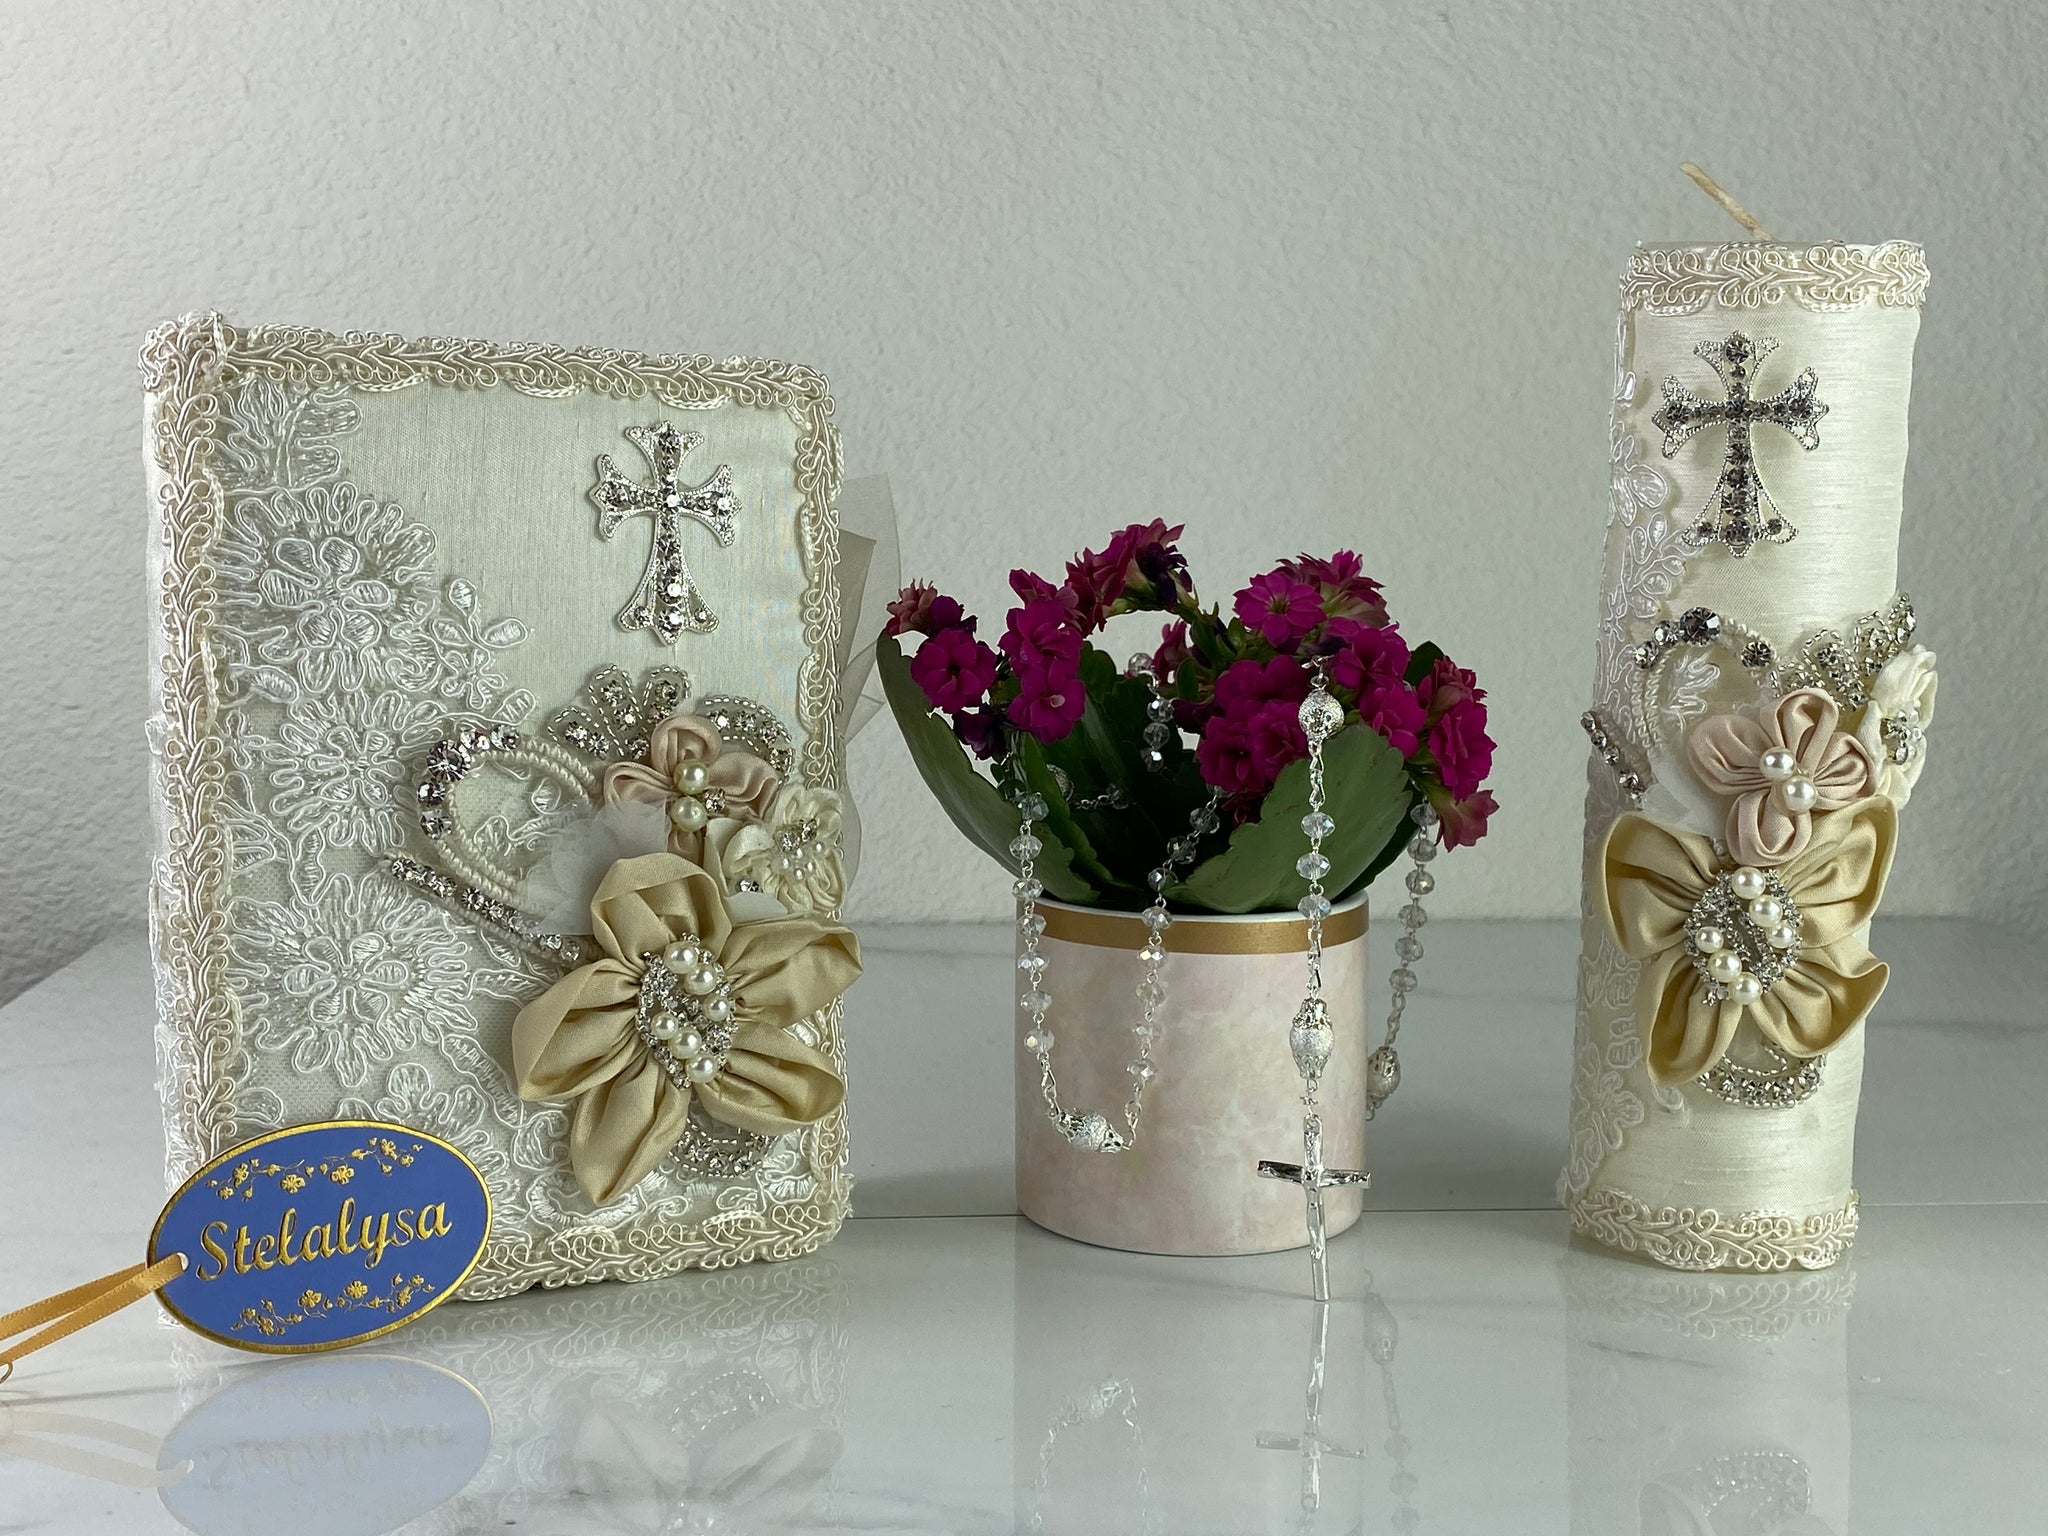 This ivory Bible Set - candle and bible is handmade and made using satin and lace.  It is elegantly designed with pearls, crystals, flowers in different pastel colors, and beads.  Each piece has a beautiful cross.  An elegant rosary complements this set.  The rosary is 16.5 in. long and Bible is 6.5 in. by 4.5 in. and the candles approximately the same height.  The Bible includes the Old and New Testament in English. 